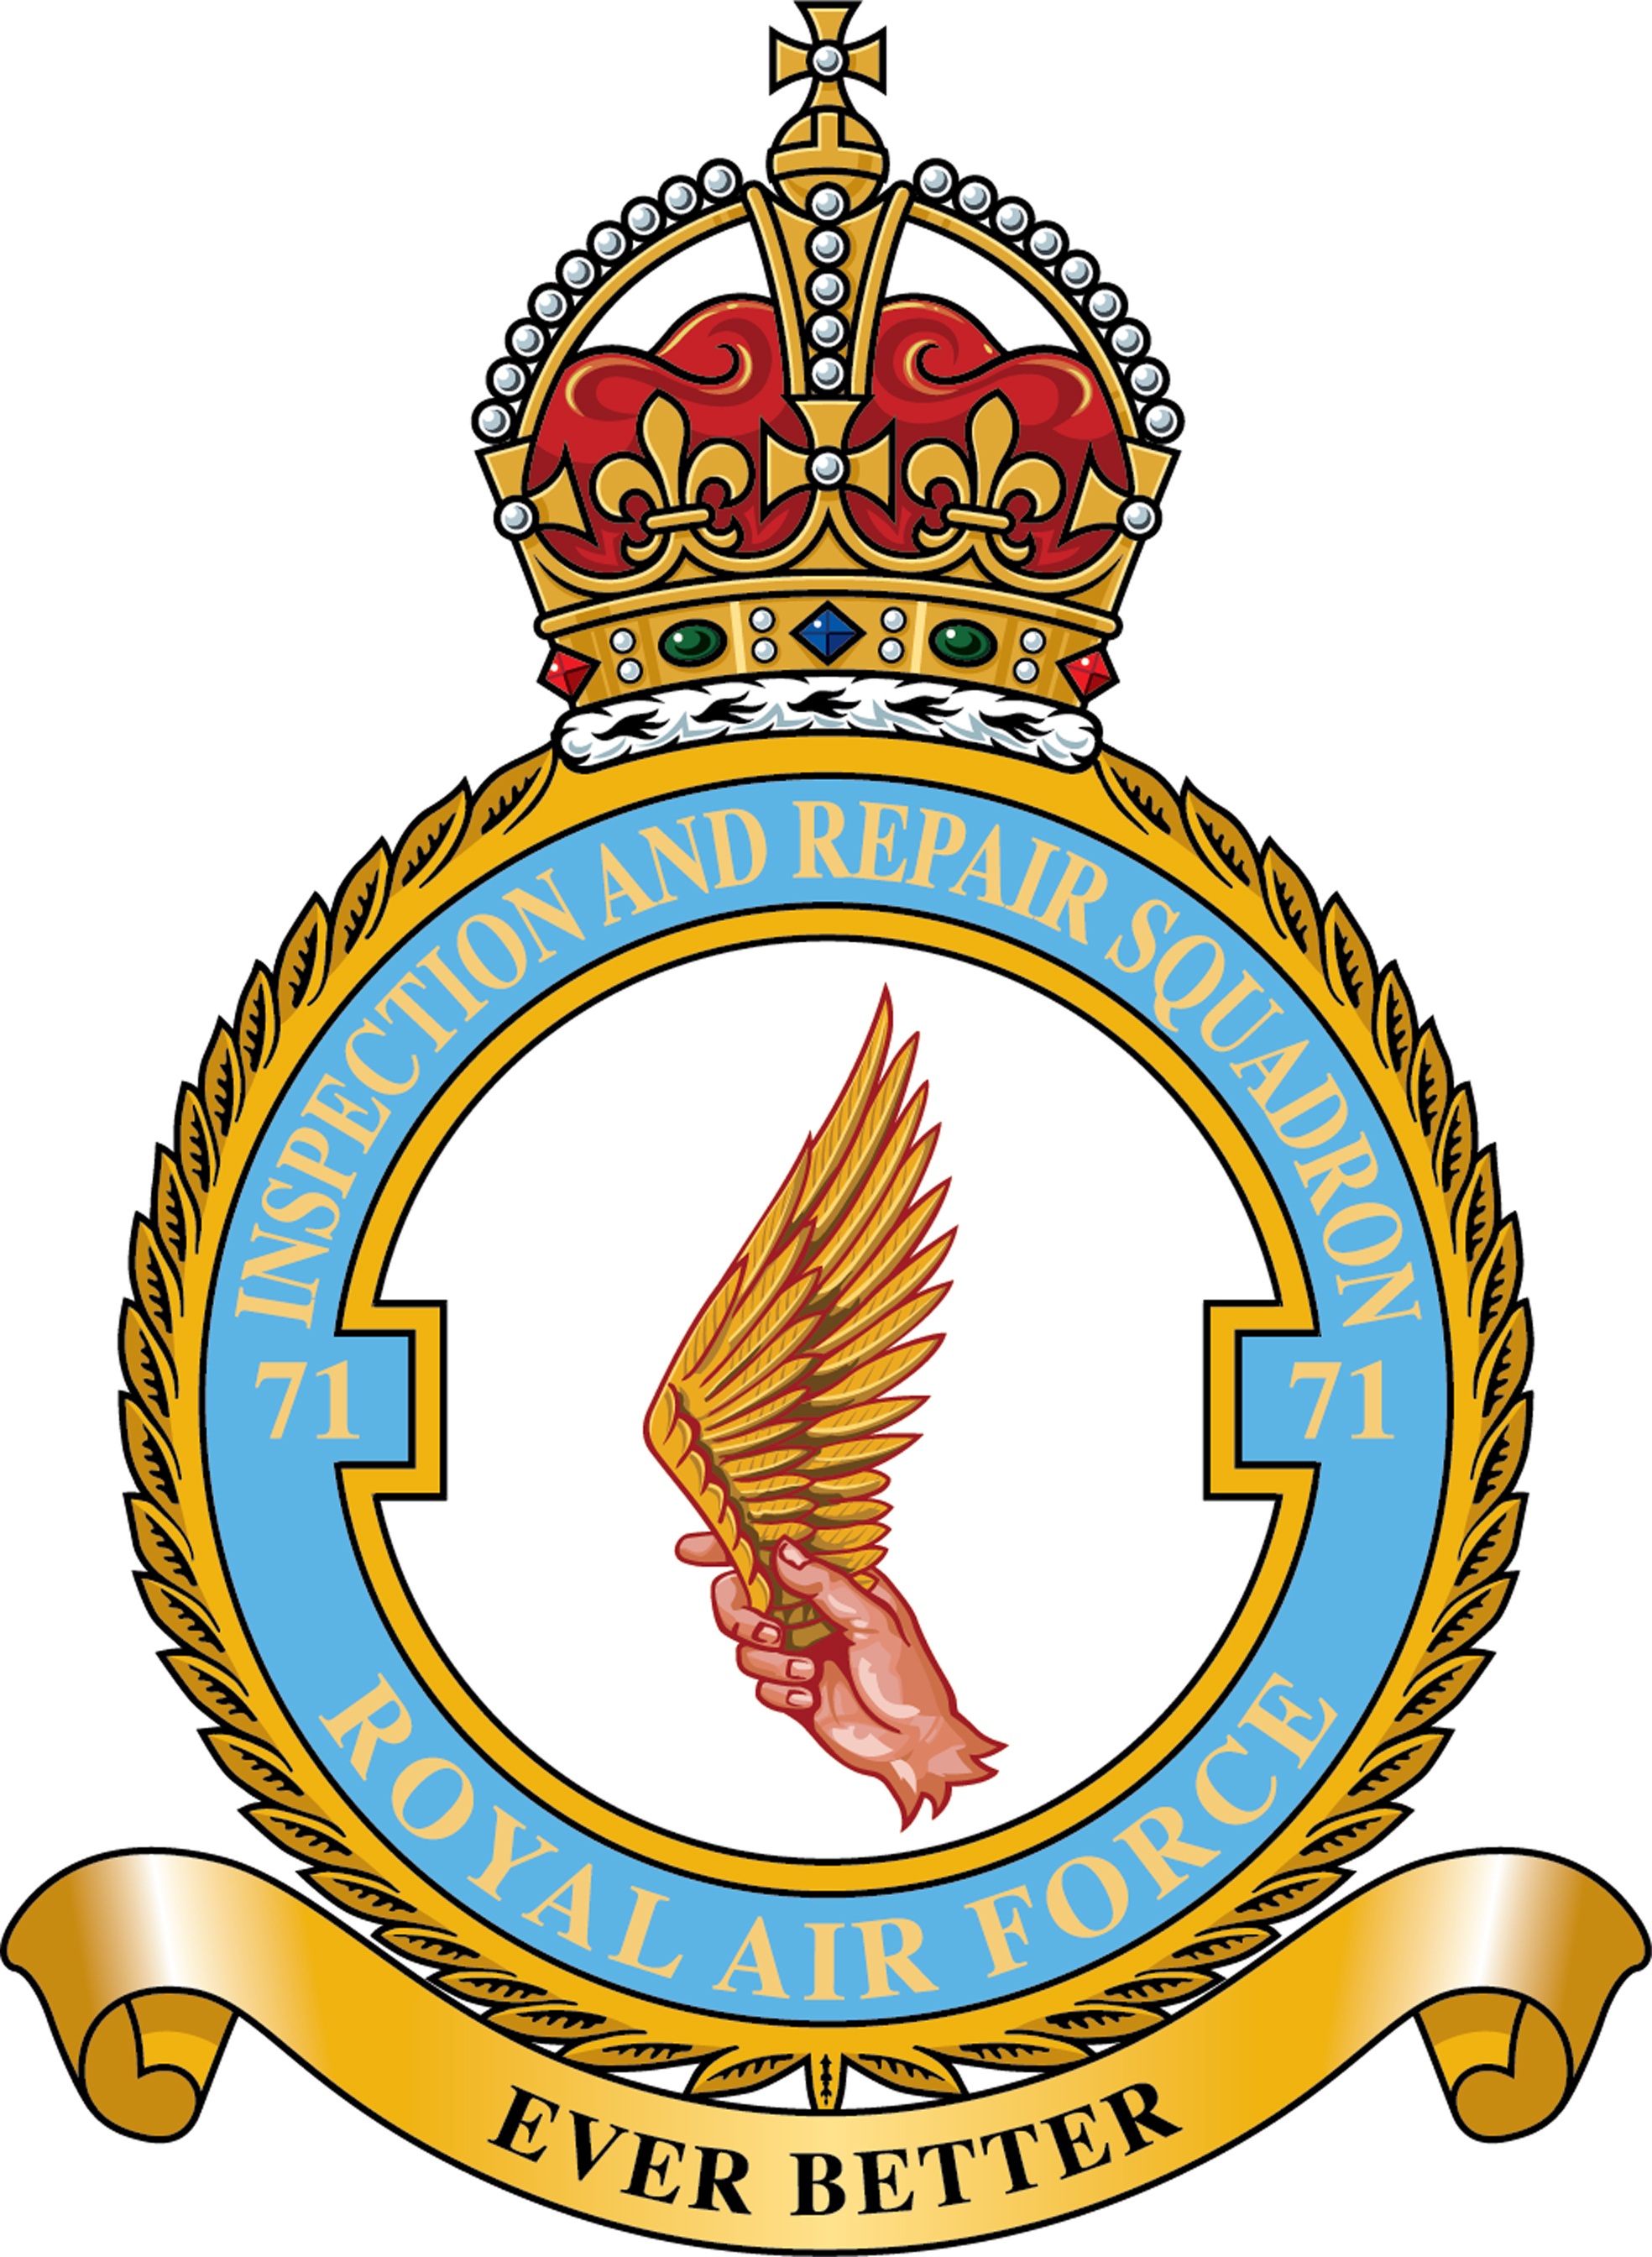 Inspection and repair squadron badge